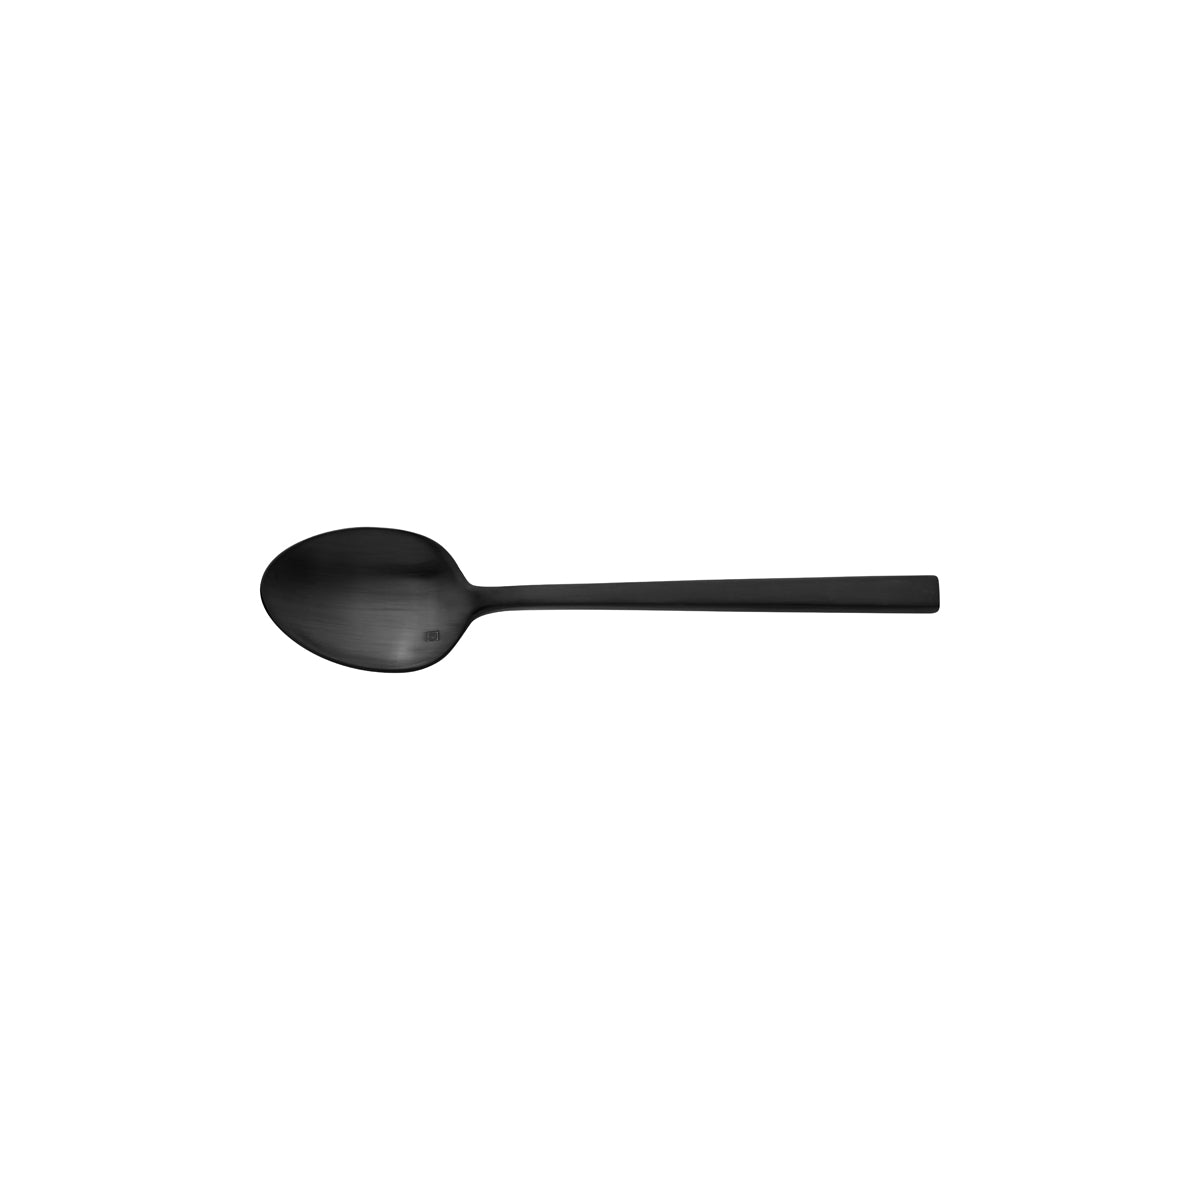 Dessert Spoon - Arezzo, Black from Fortessa. made out of Stainless Steel and sold in boxes of 12. Hospitality quality at wholesale price with The Flying Fork! 